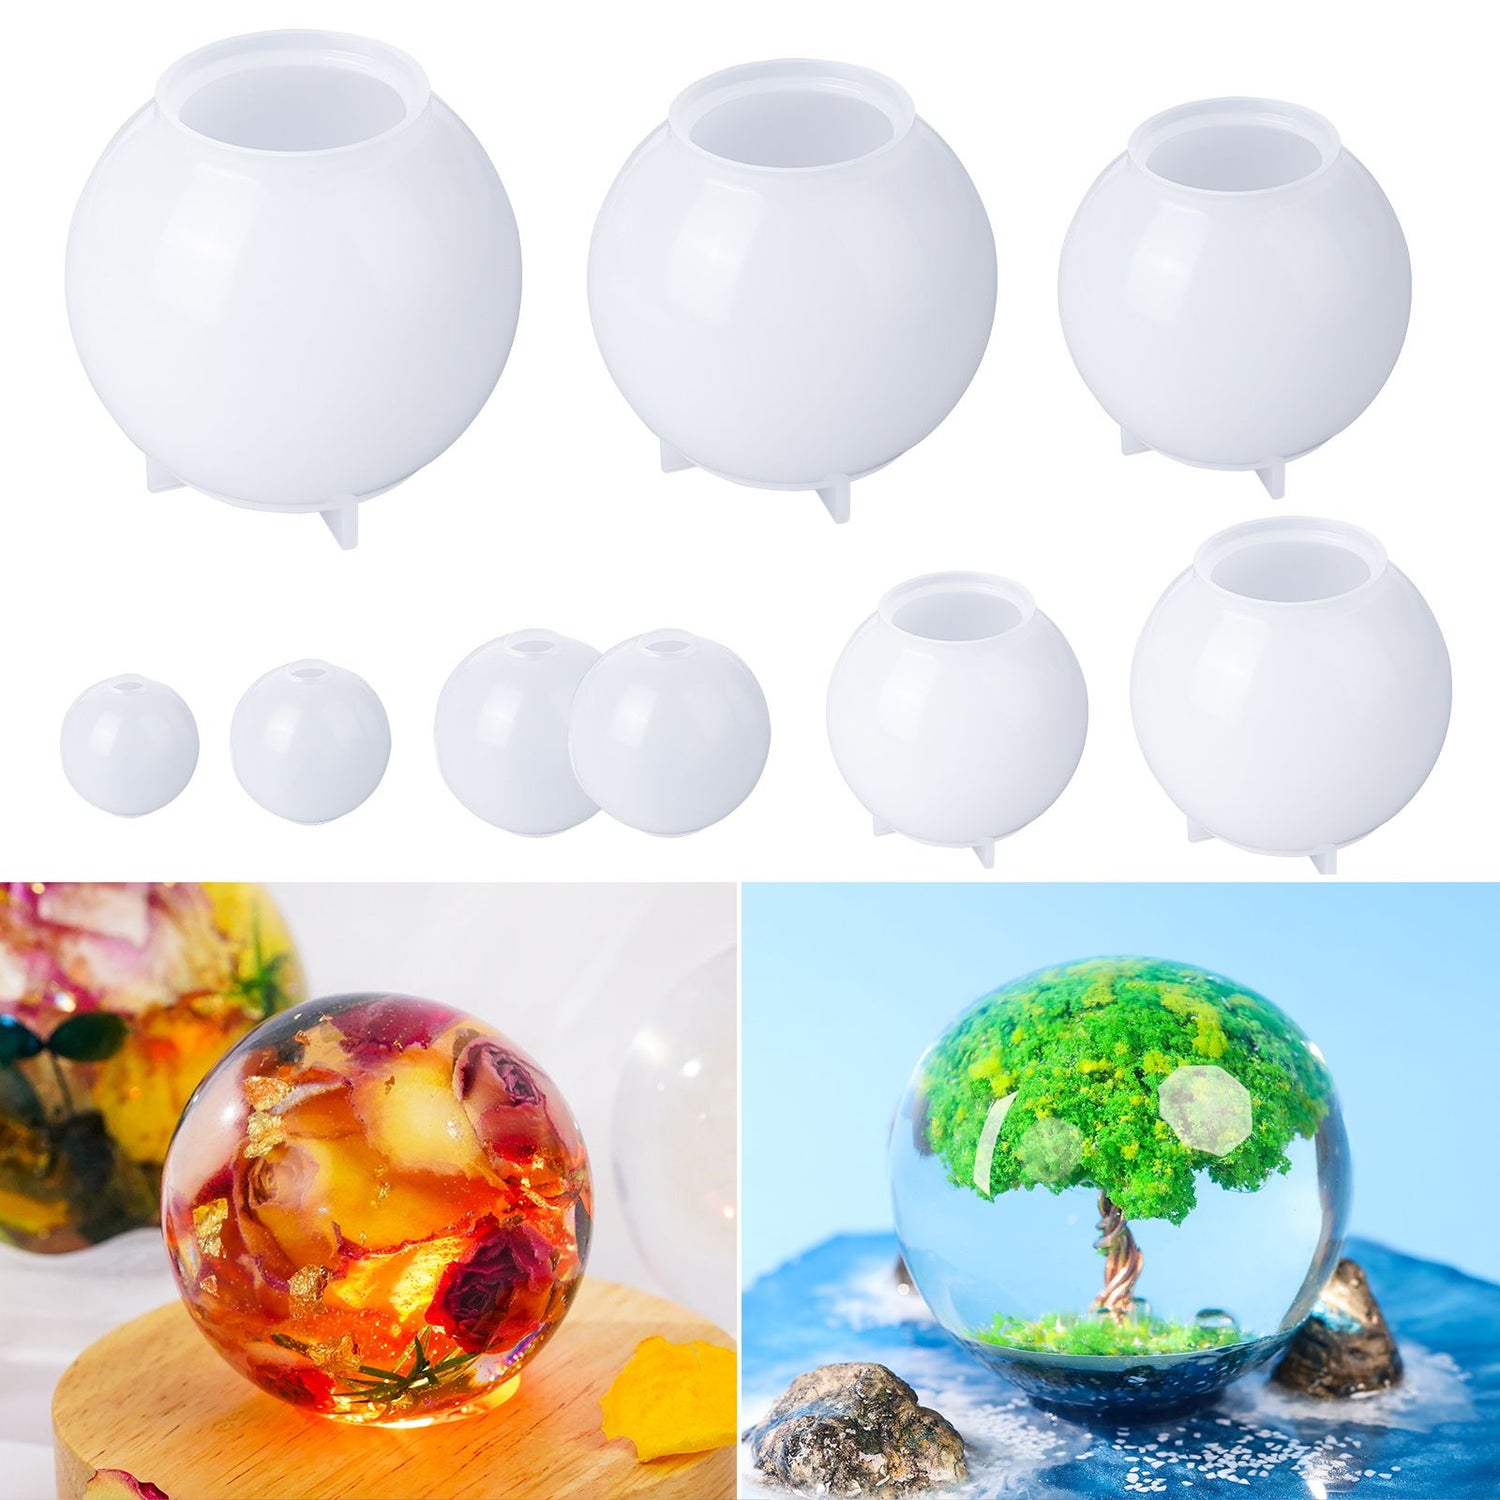 Silicone Mold For 3D Sphere And Round Ball Crafting 20mm From